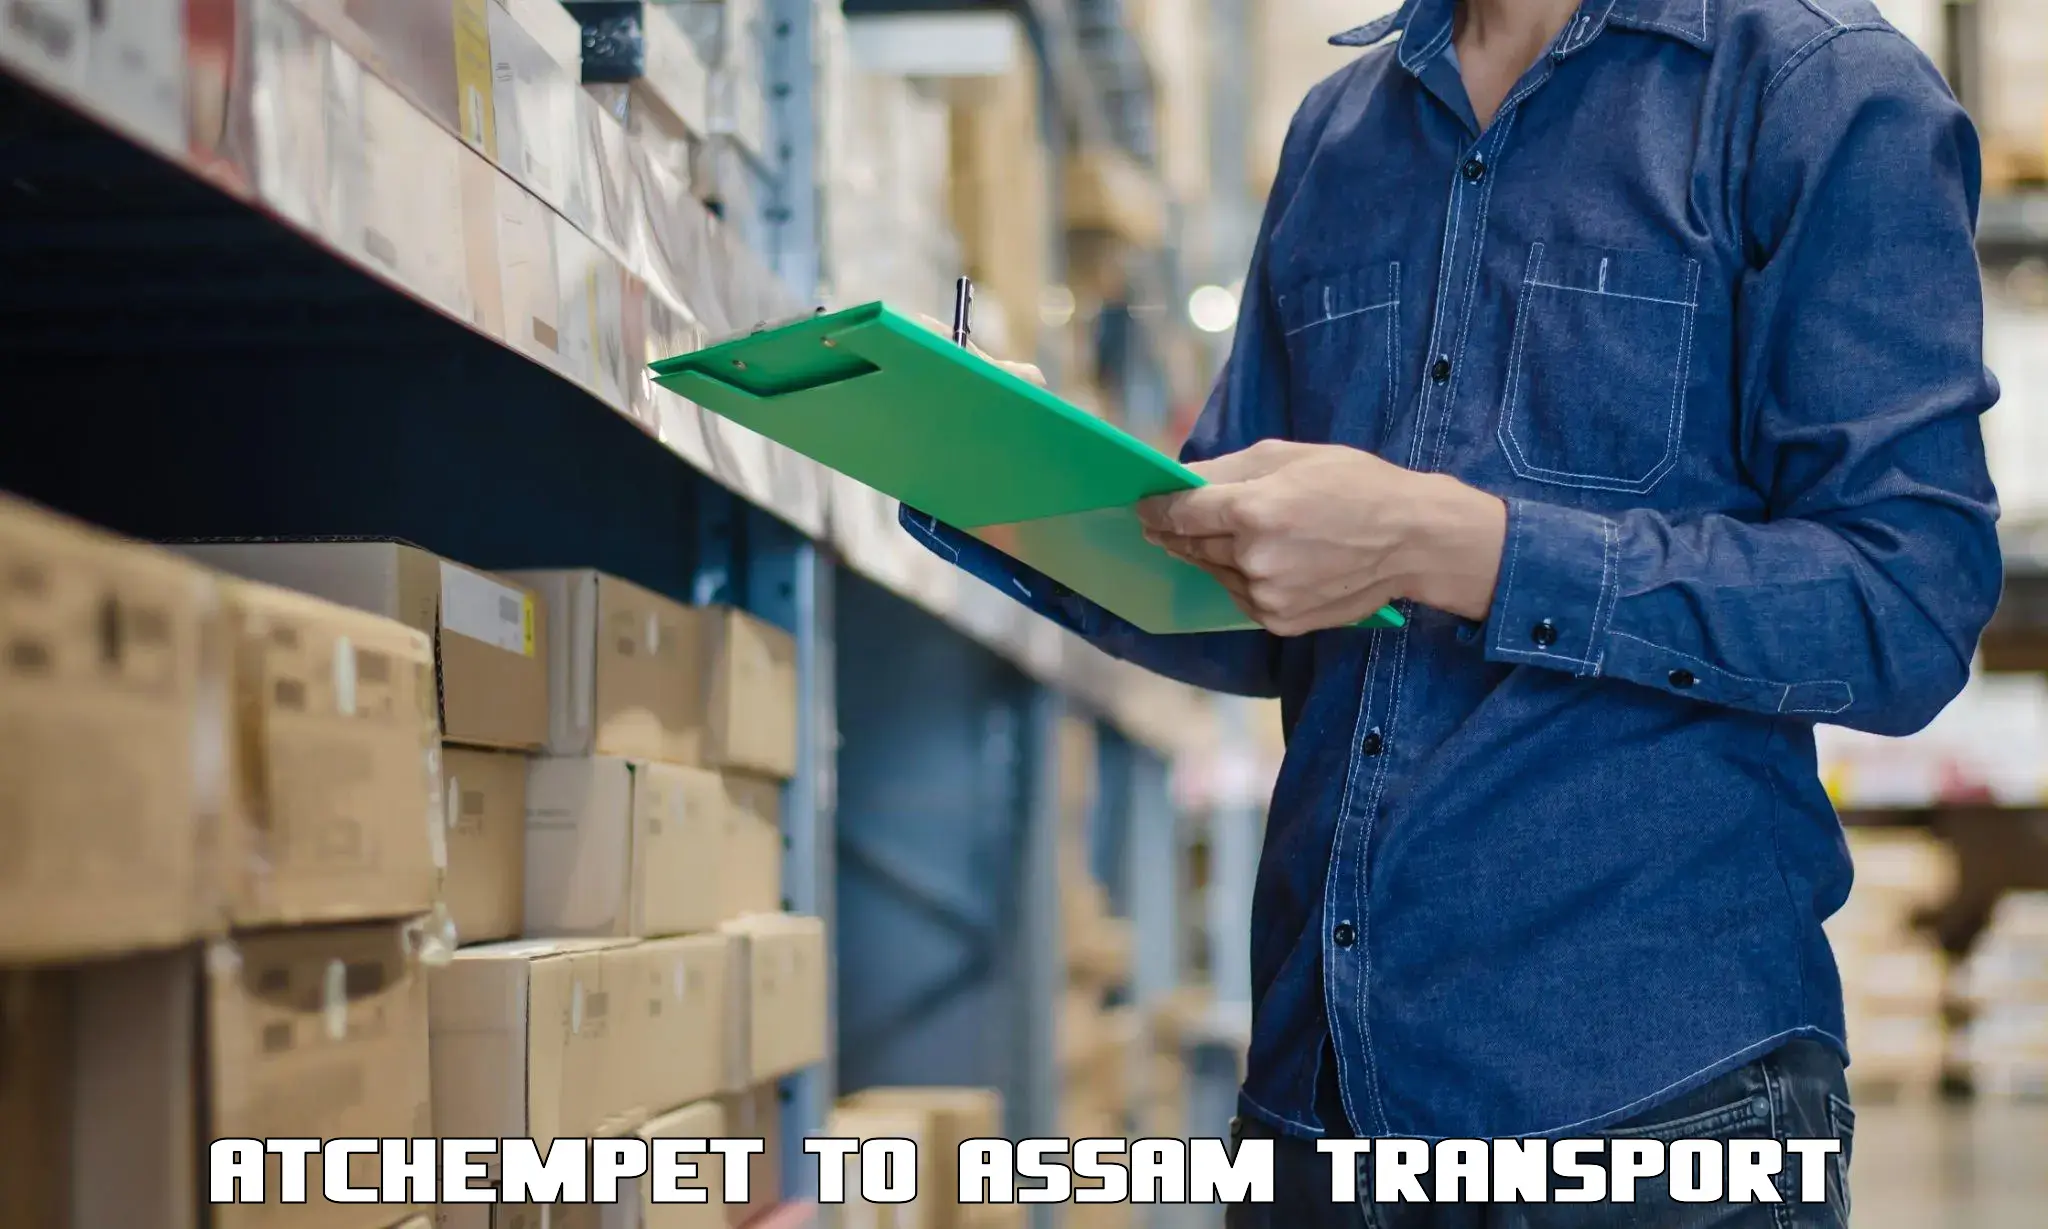 Container transport service Atchempet to Lala Assam